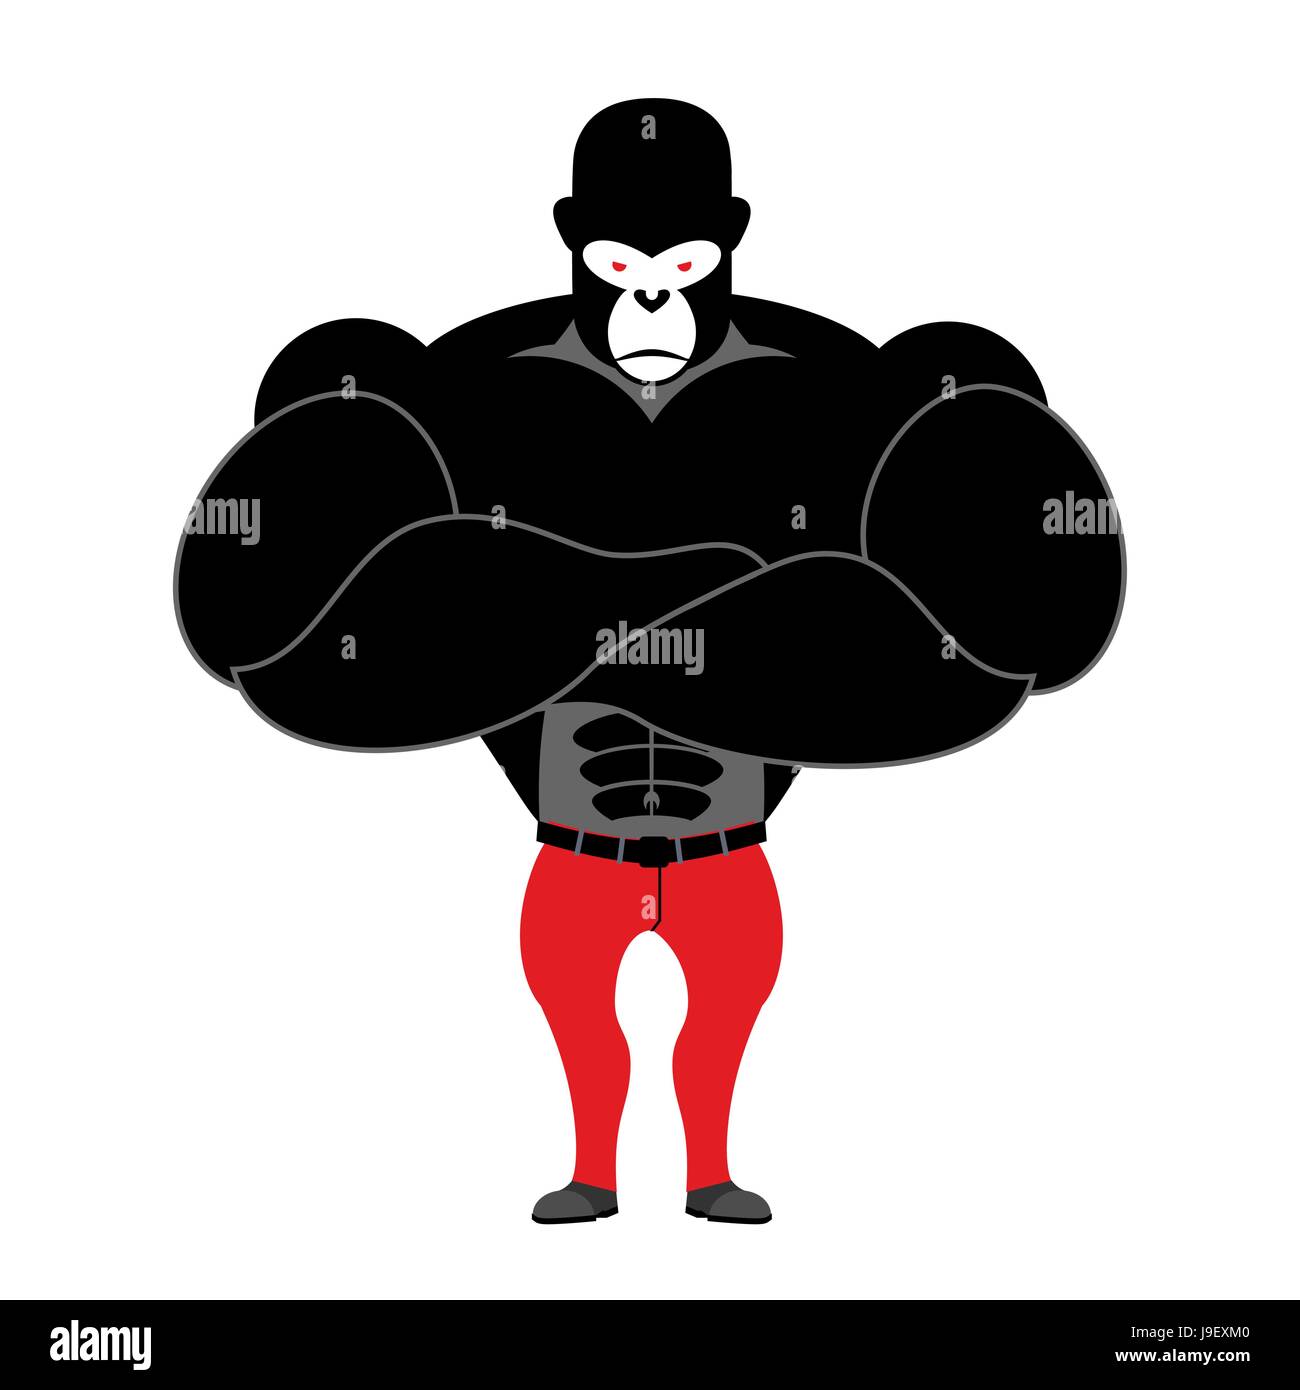 cartoon characters on steroids